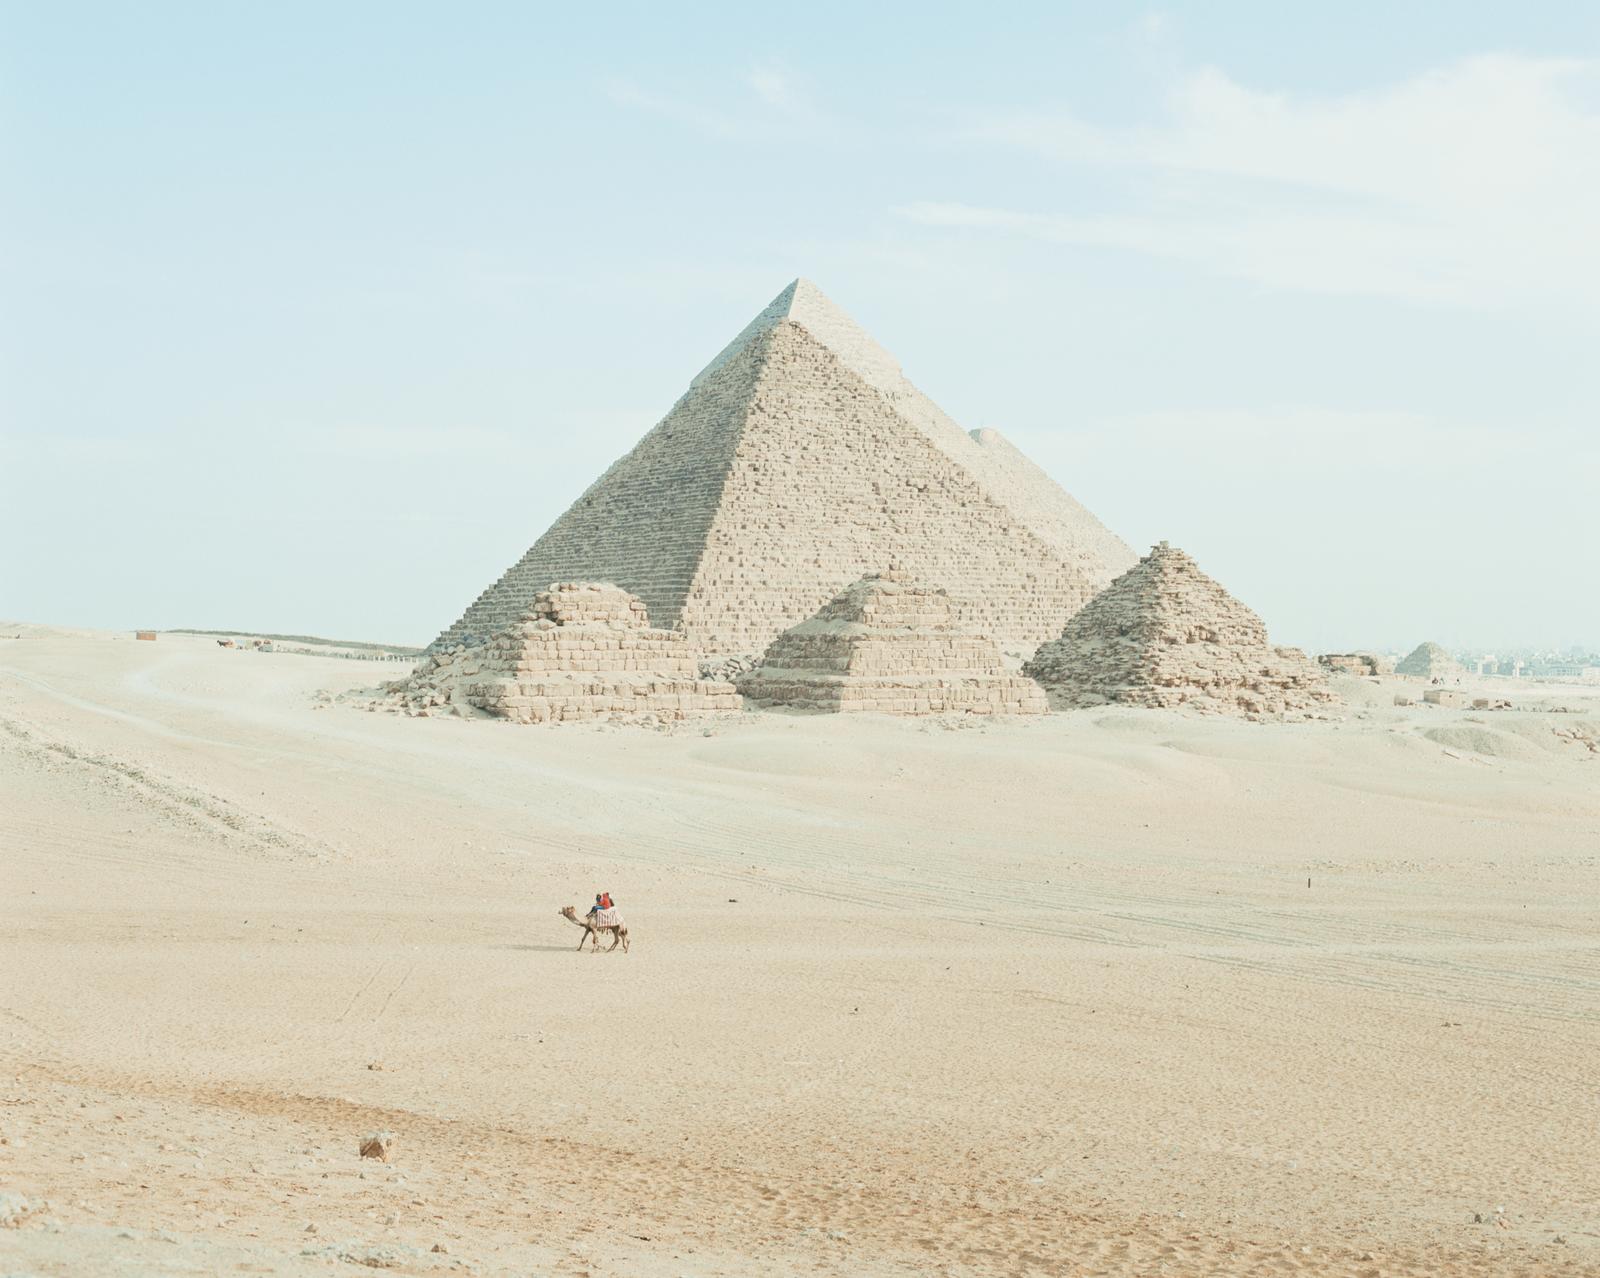 Can You *Actually* Score at Least 83% On This All-Rounded Knowledge Quiz? The Great Pyramids of Giza, Egypt